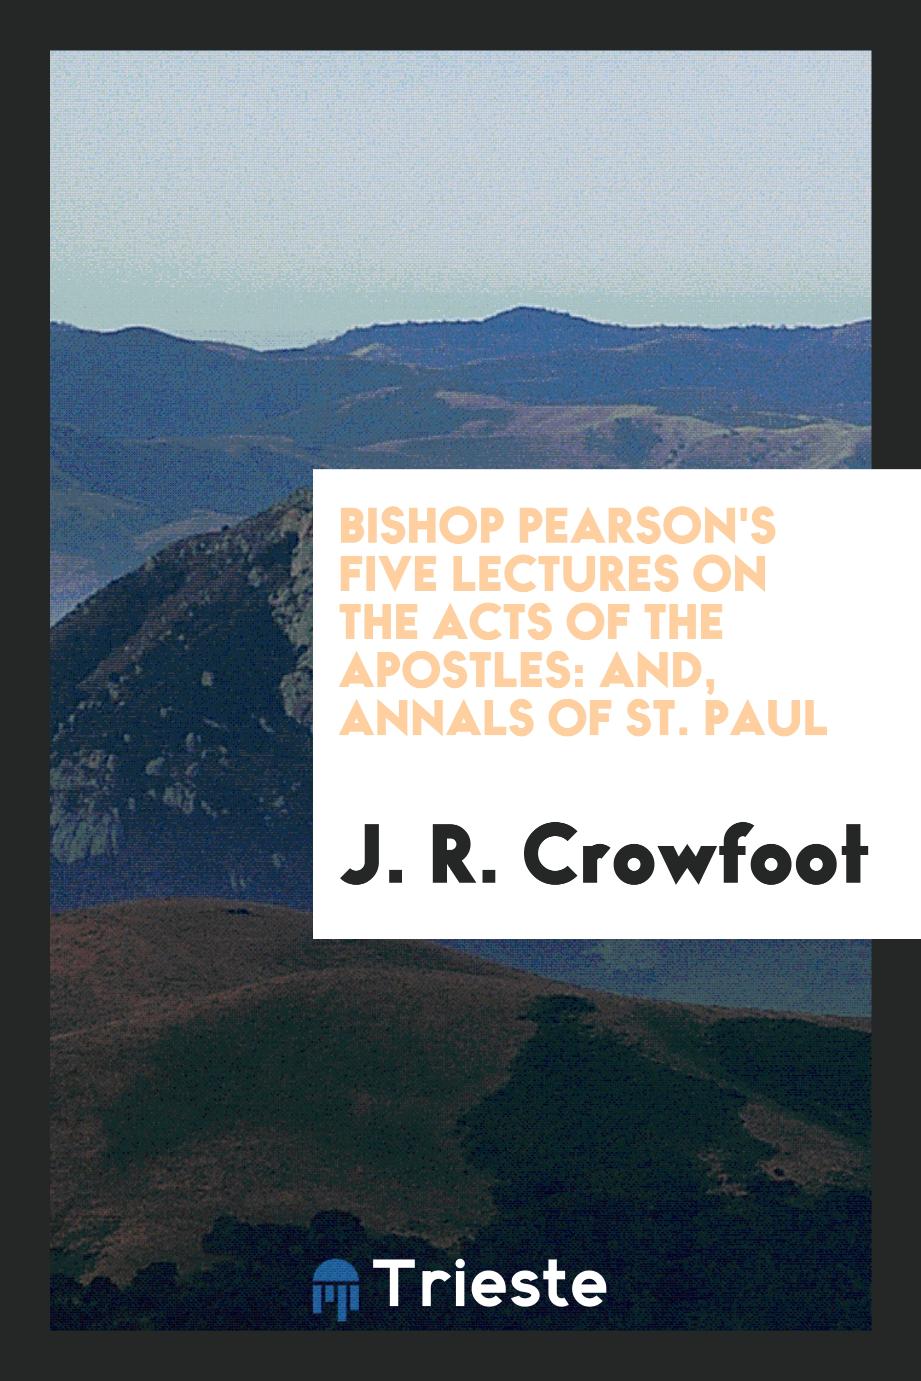 Bishop Pearson's Five Lectures on the Acts of the Apostles: And, Annals of St. Paul